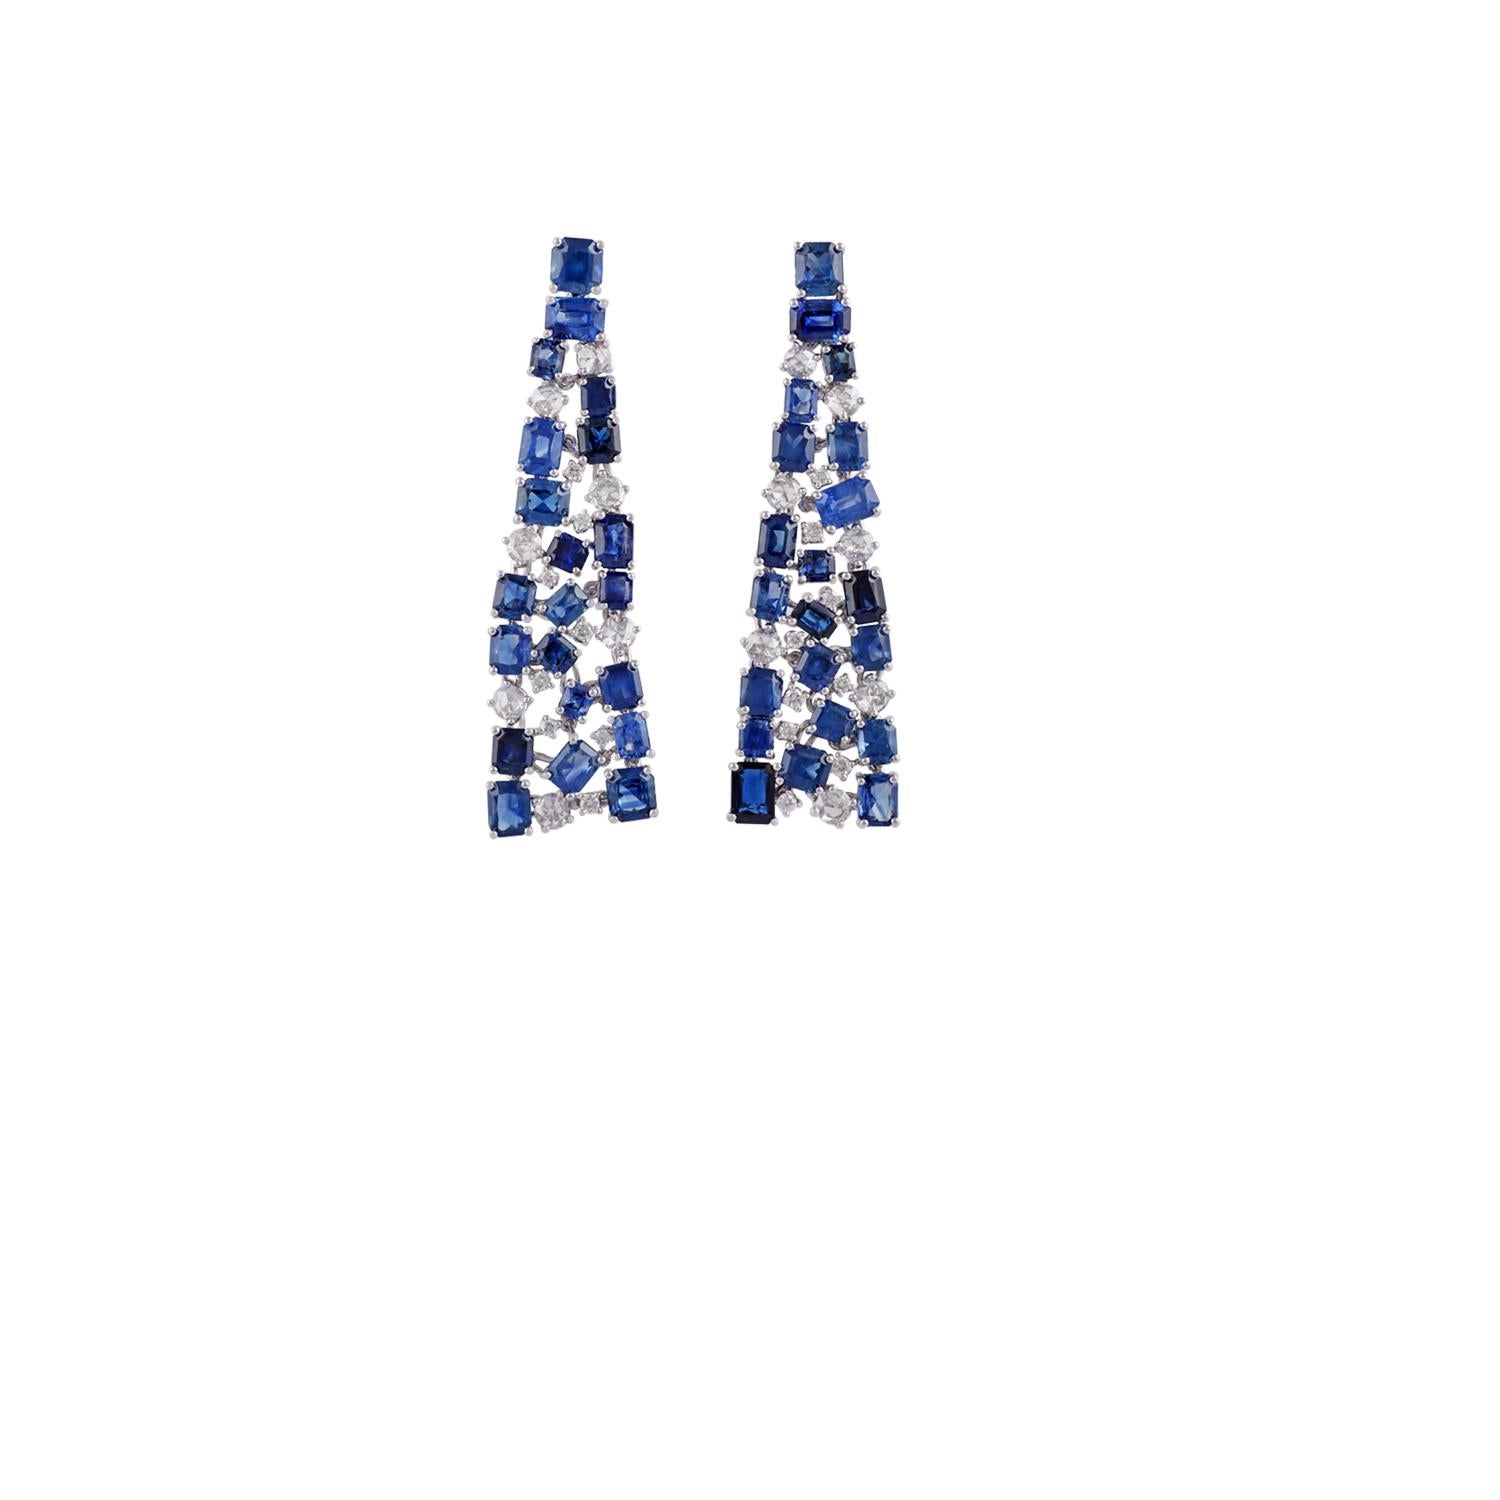 These are an elegant blue sapphire & diamonds earrings studded in 18k white gold features 42 pieces of octagon shaped blue sapphires weight 19 carat with 31 pieces of round shaped diamonds weight 1.85 carat, this earring pair entirely made of 18k